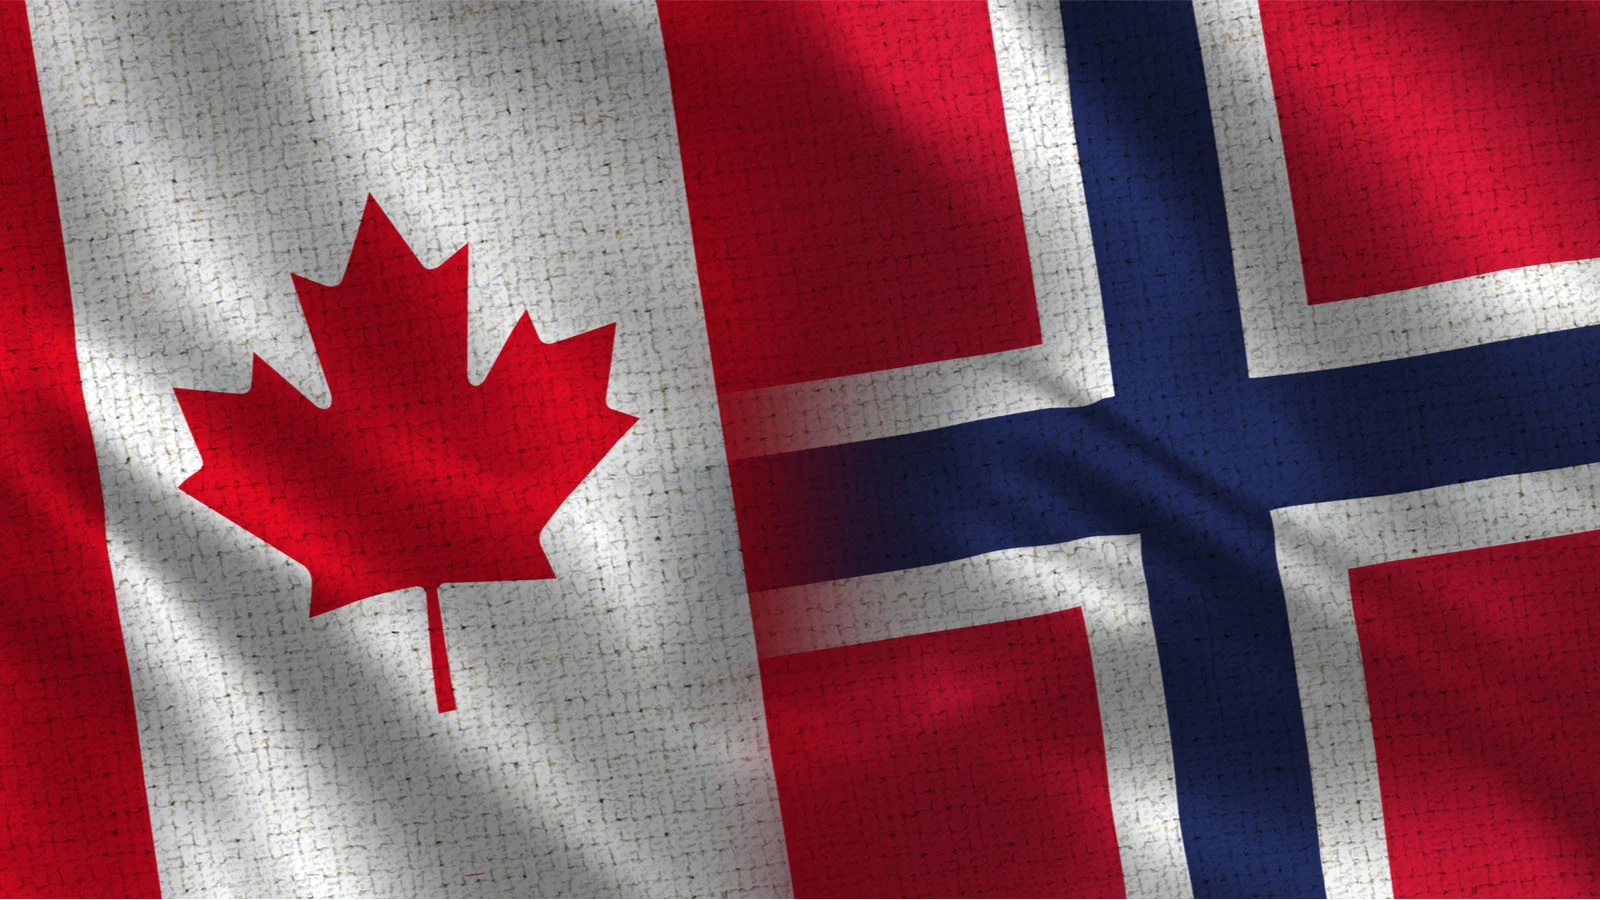 Canada and Norway flags